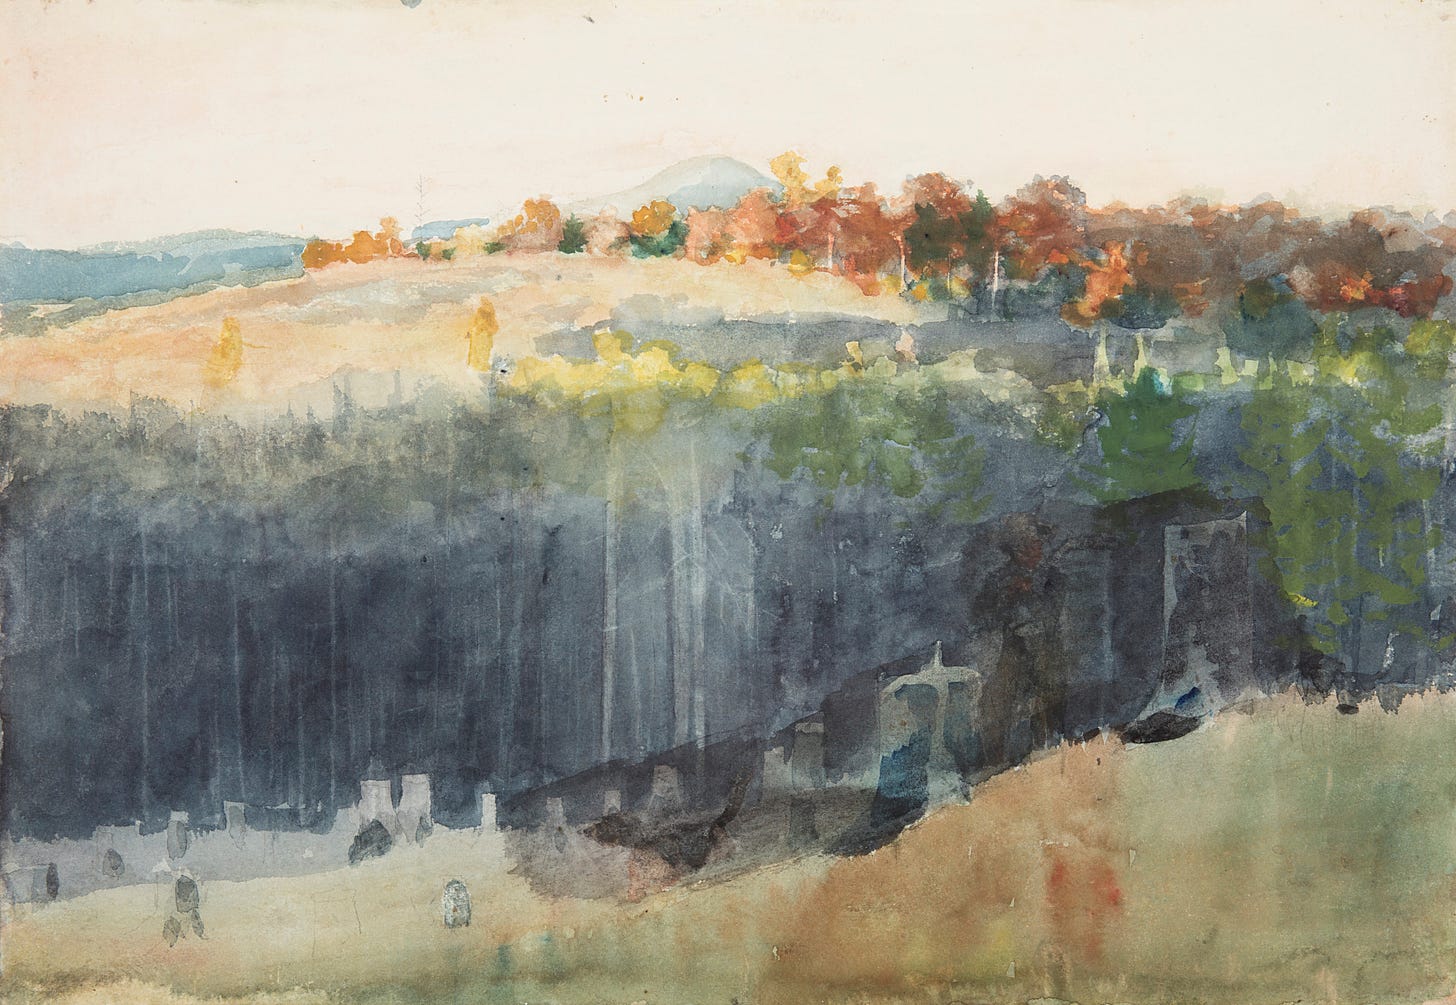 Valley and Hillside (1889)